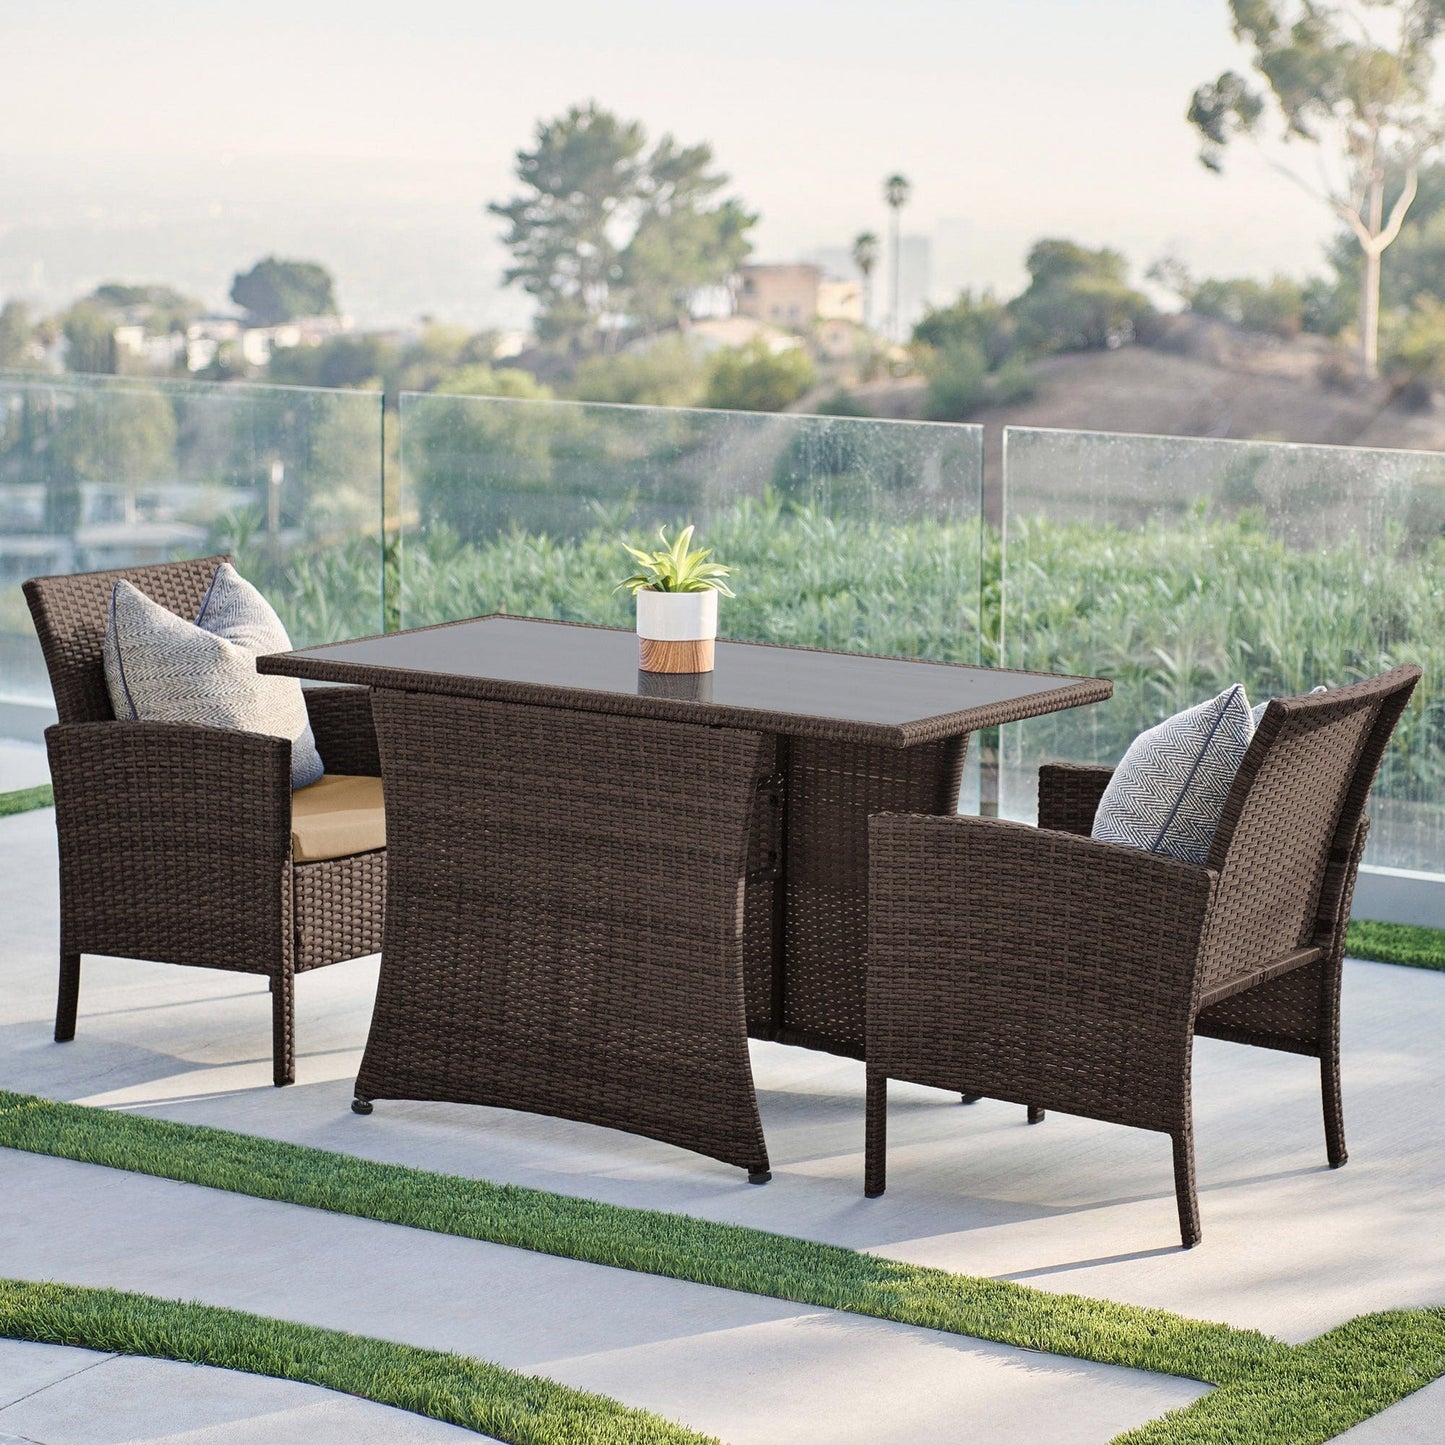 Dreamline Outdoor Garden/Balcony Patio Seating Set 1+2, 2 Chairs Rectangle Shaped Table (Easy To Handle)